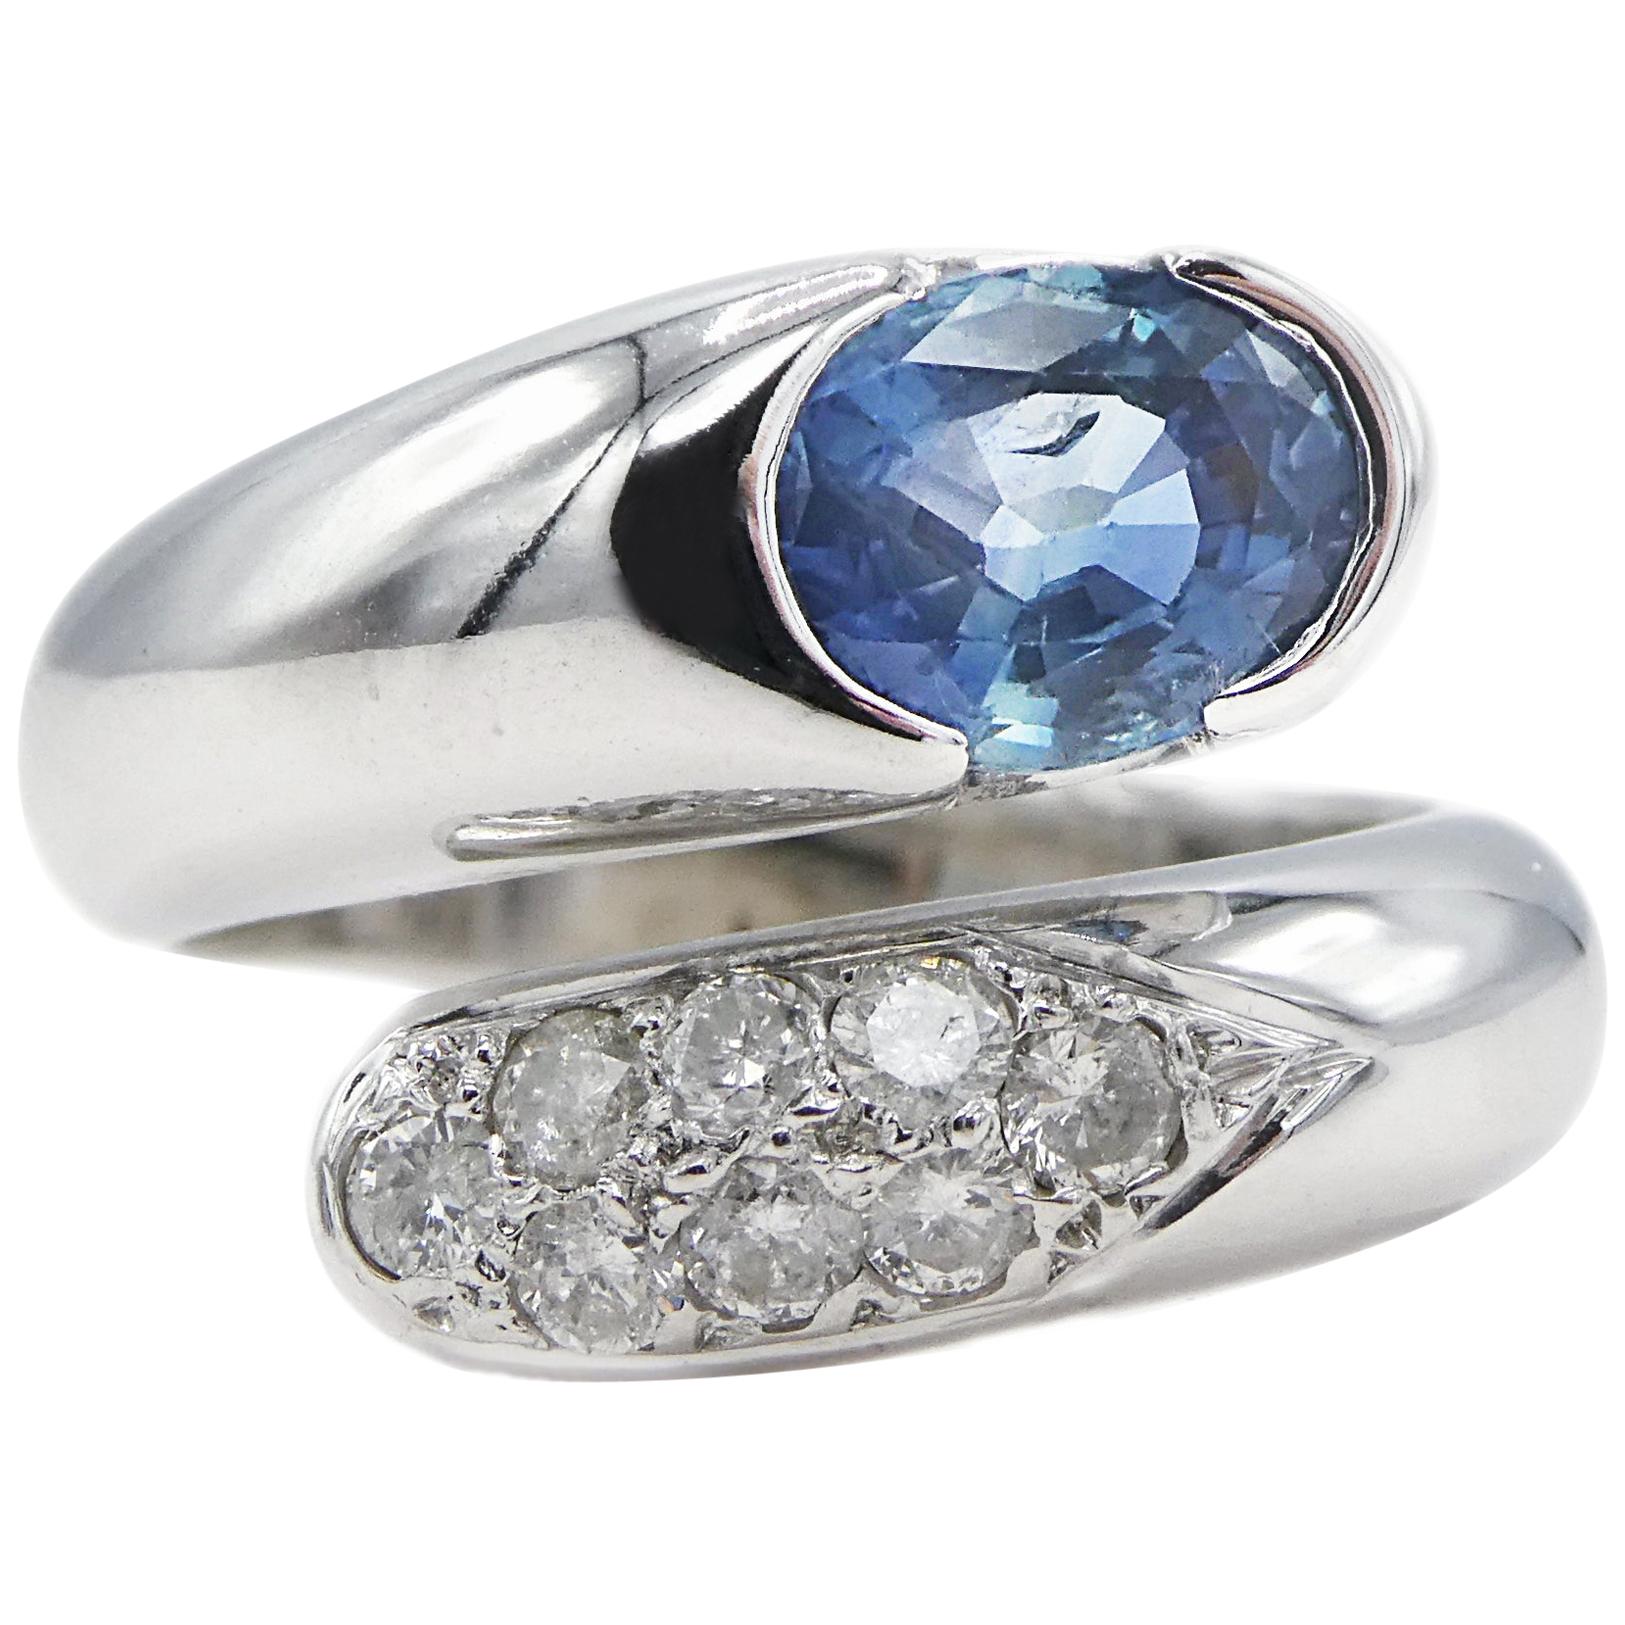 14 Karat White Gold Pave Diamond and Oval Blue Sapphire Bypass Cocktail Ring